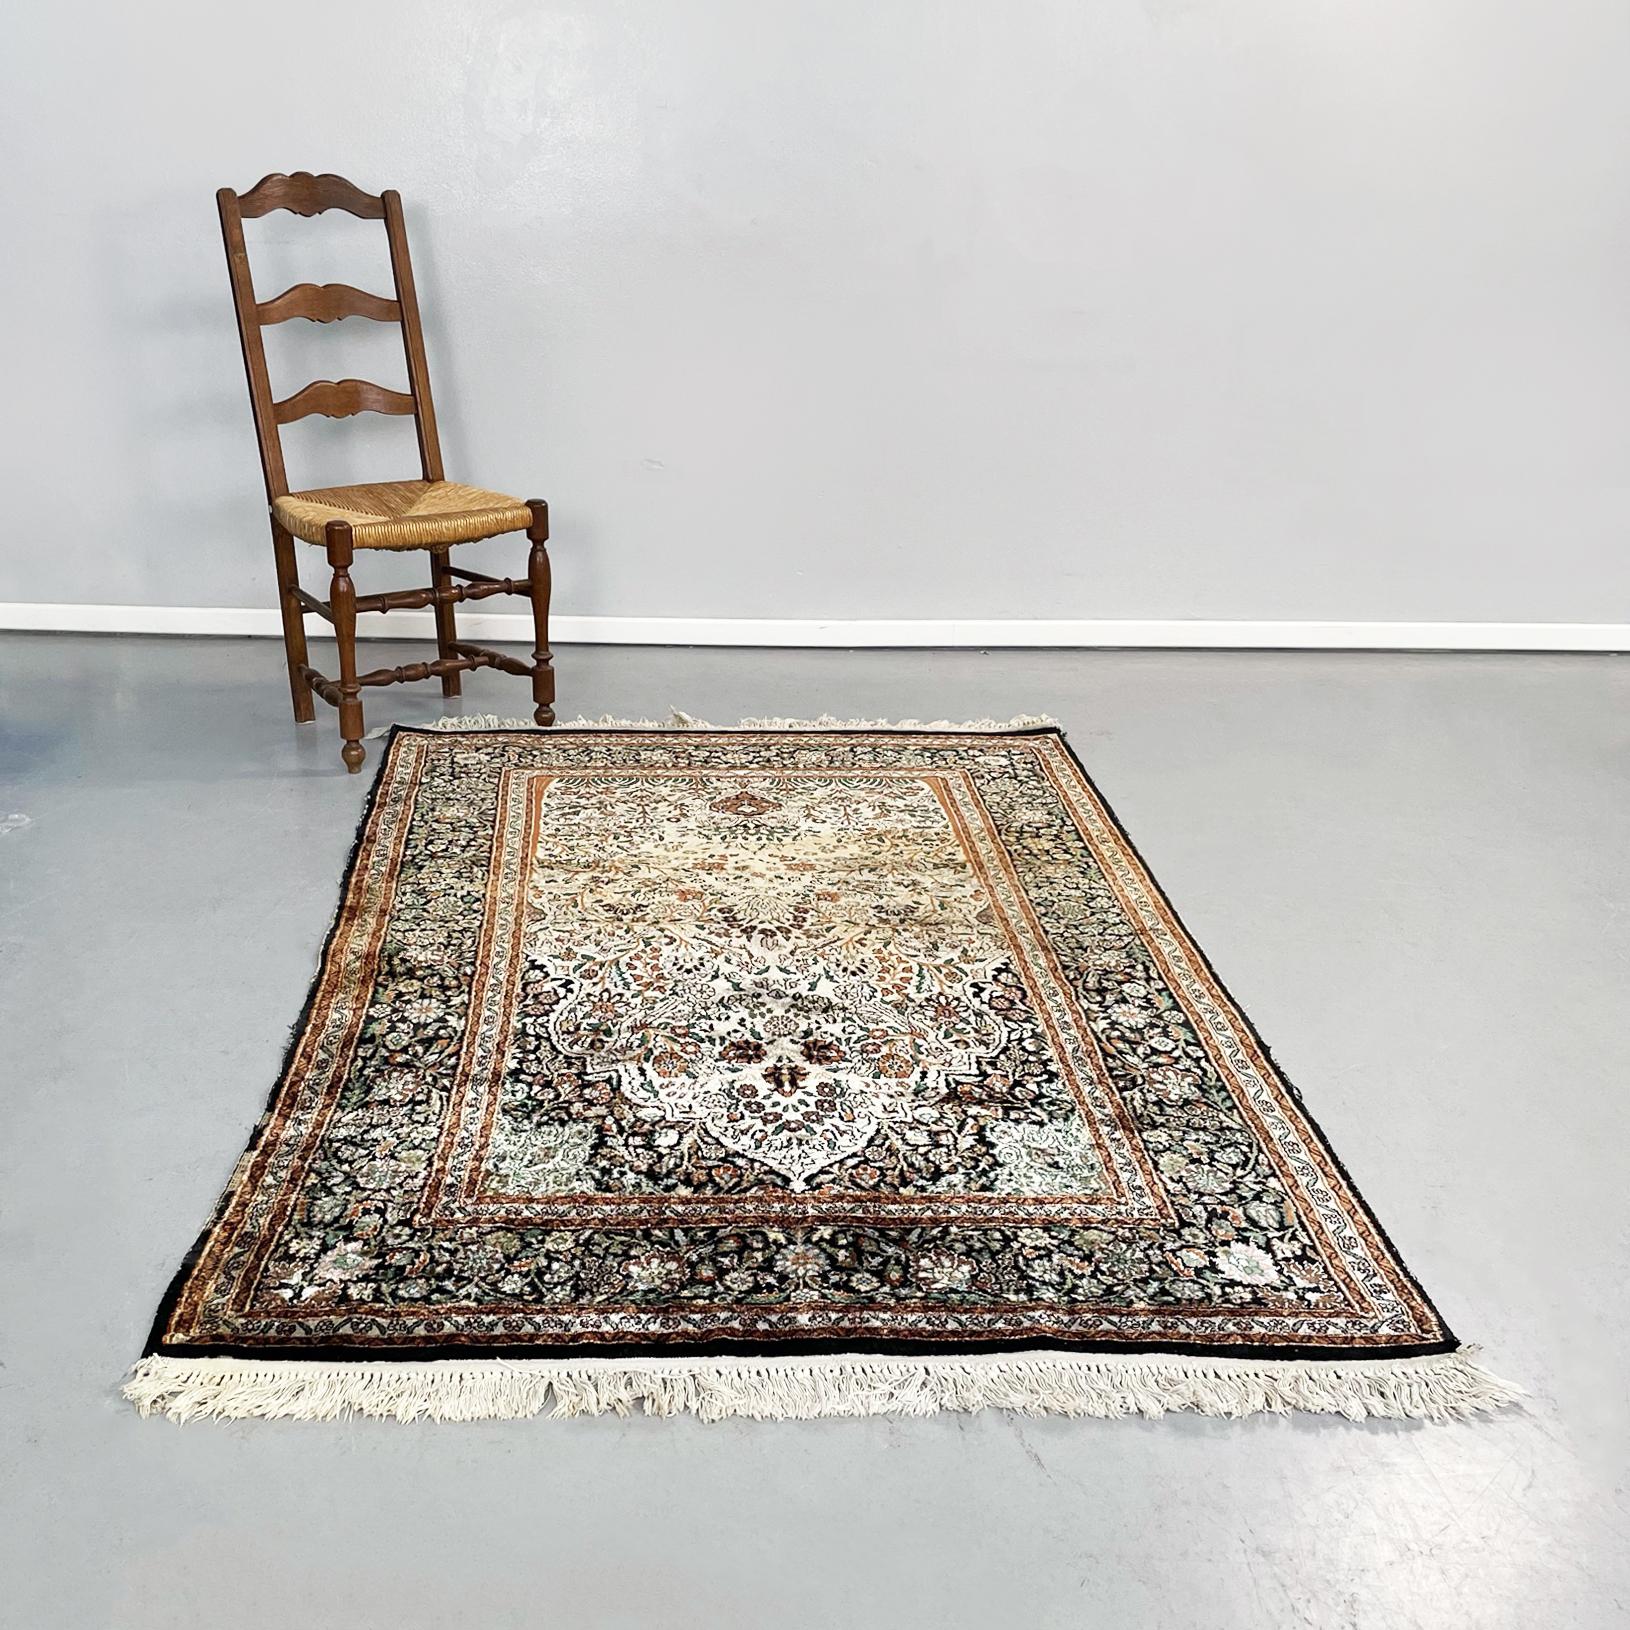 Mid-Century Modern Persian carpet in beige red black fabric, 1950s
Rectangular persian carpet in light colored fabric with floral pattern, typical of these rugs. Black exterior profile and red and beige interior. At two ends it has white